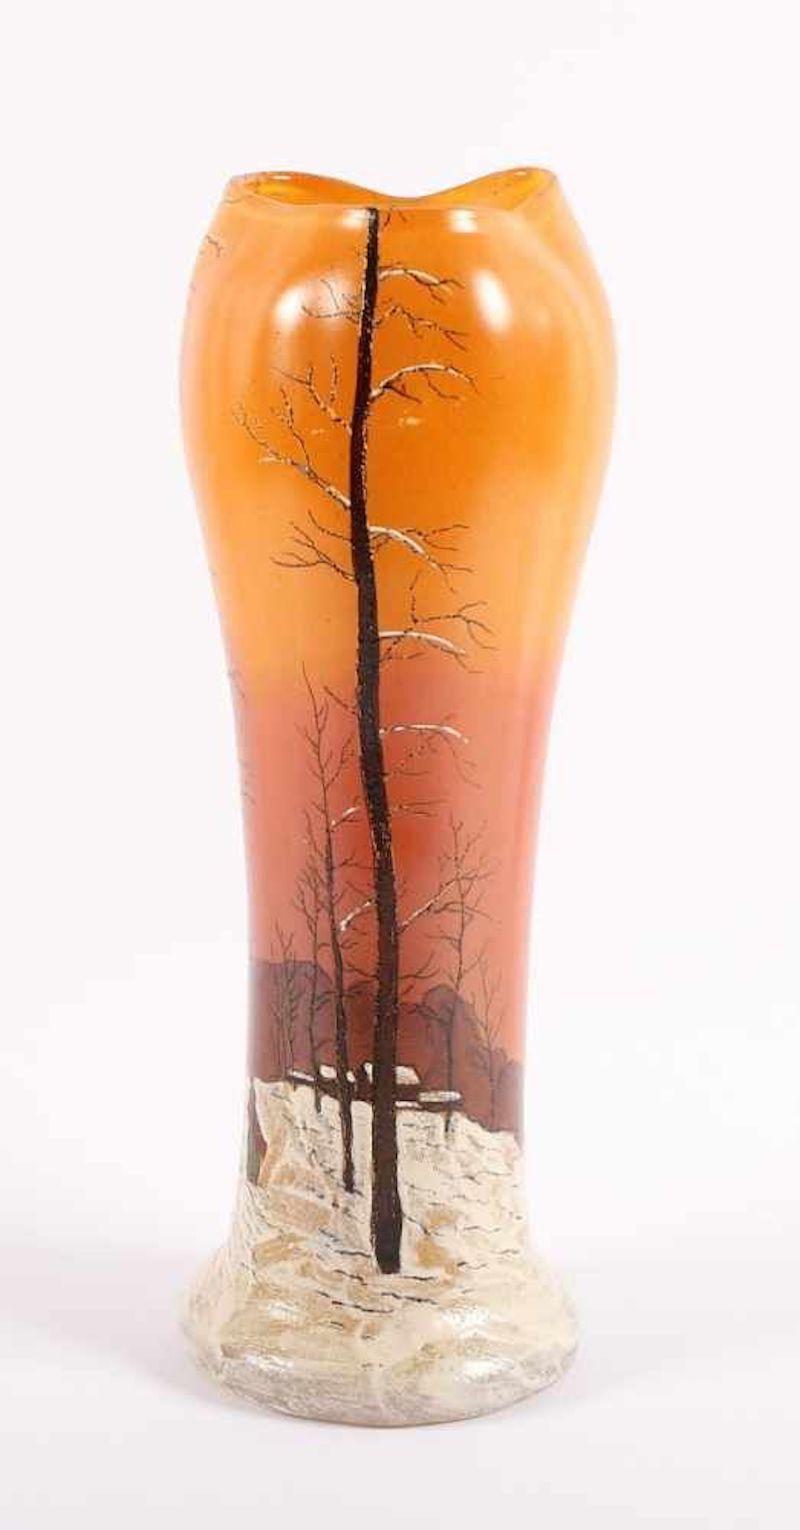 Paysage de Neige vase is an original decorative object realized in the 1920s by François-Théodore Legras.

This very precious and rare vase orange-colored with a winter landscape decoration in polychrome enamel painting and black plumb line.